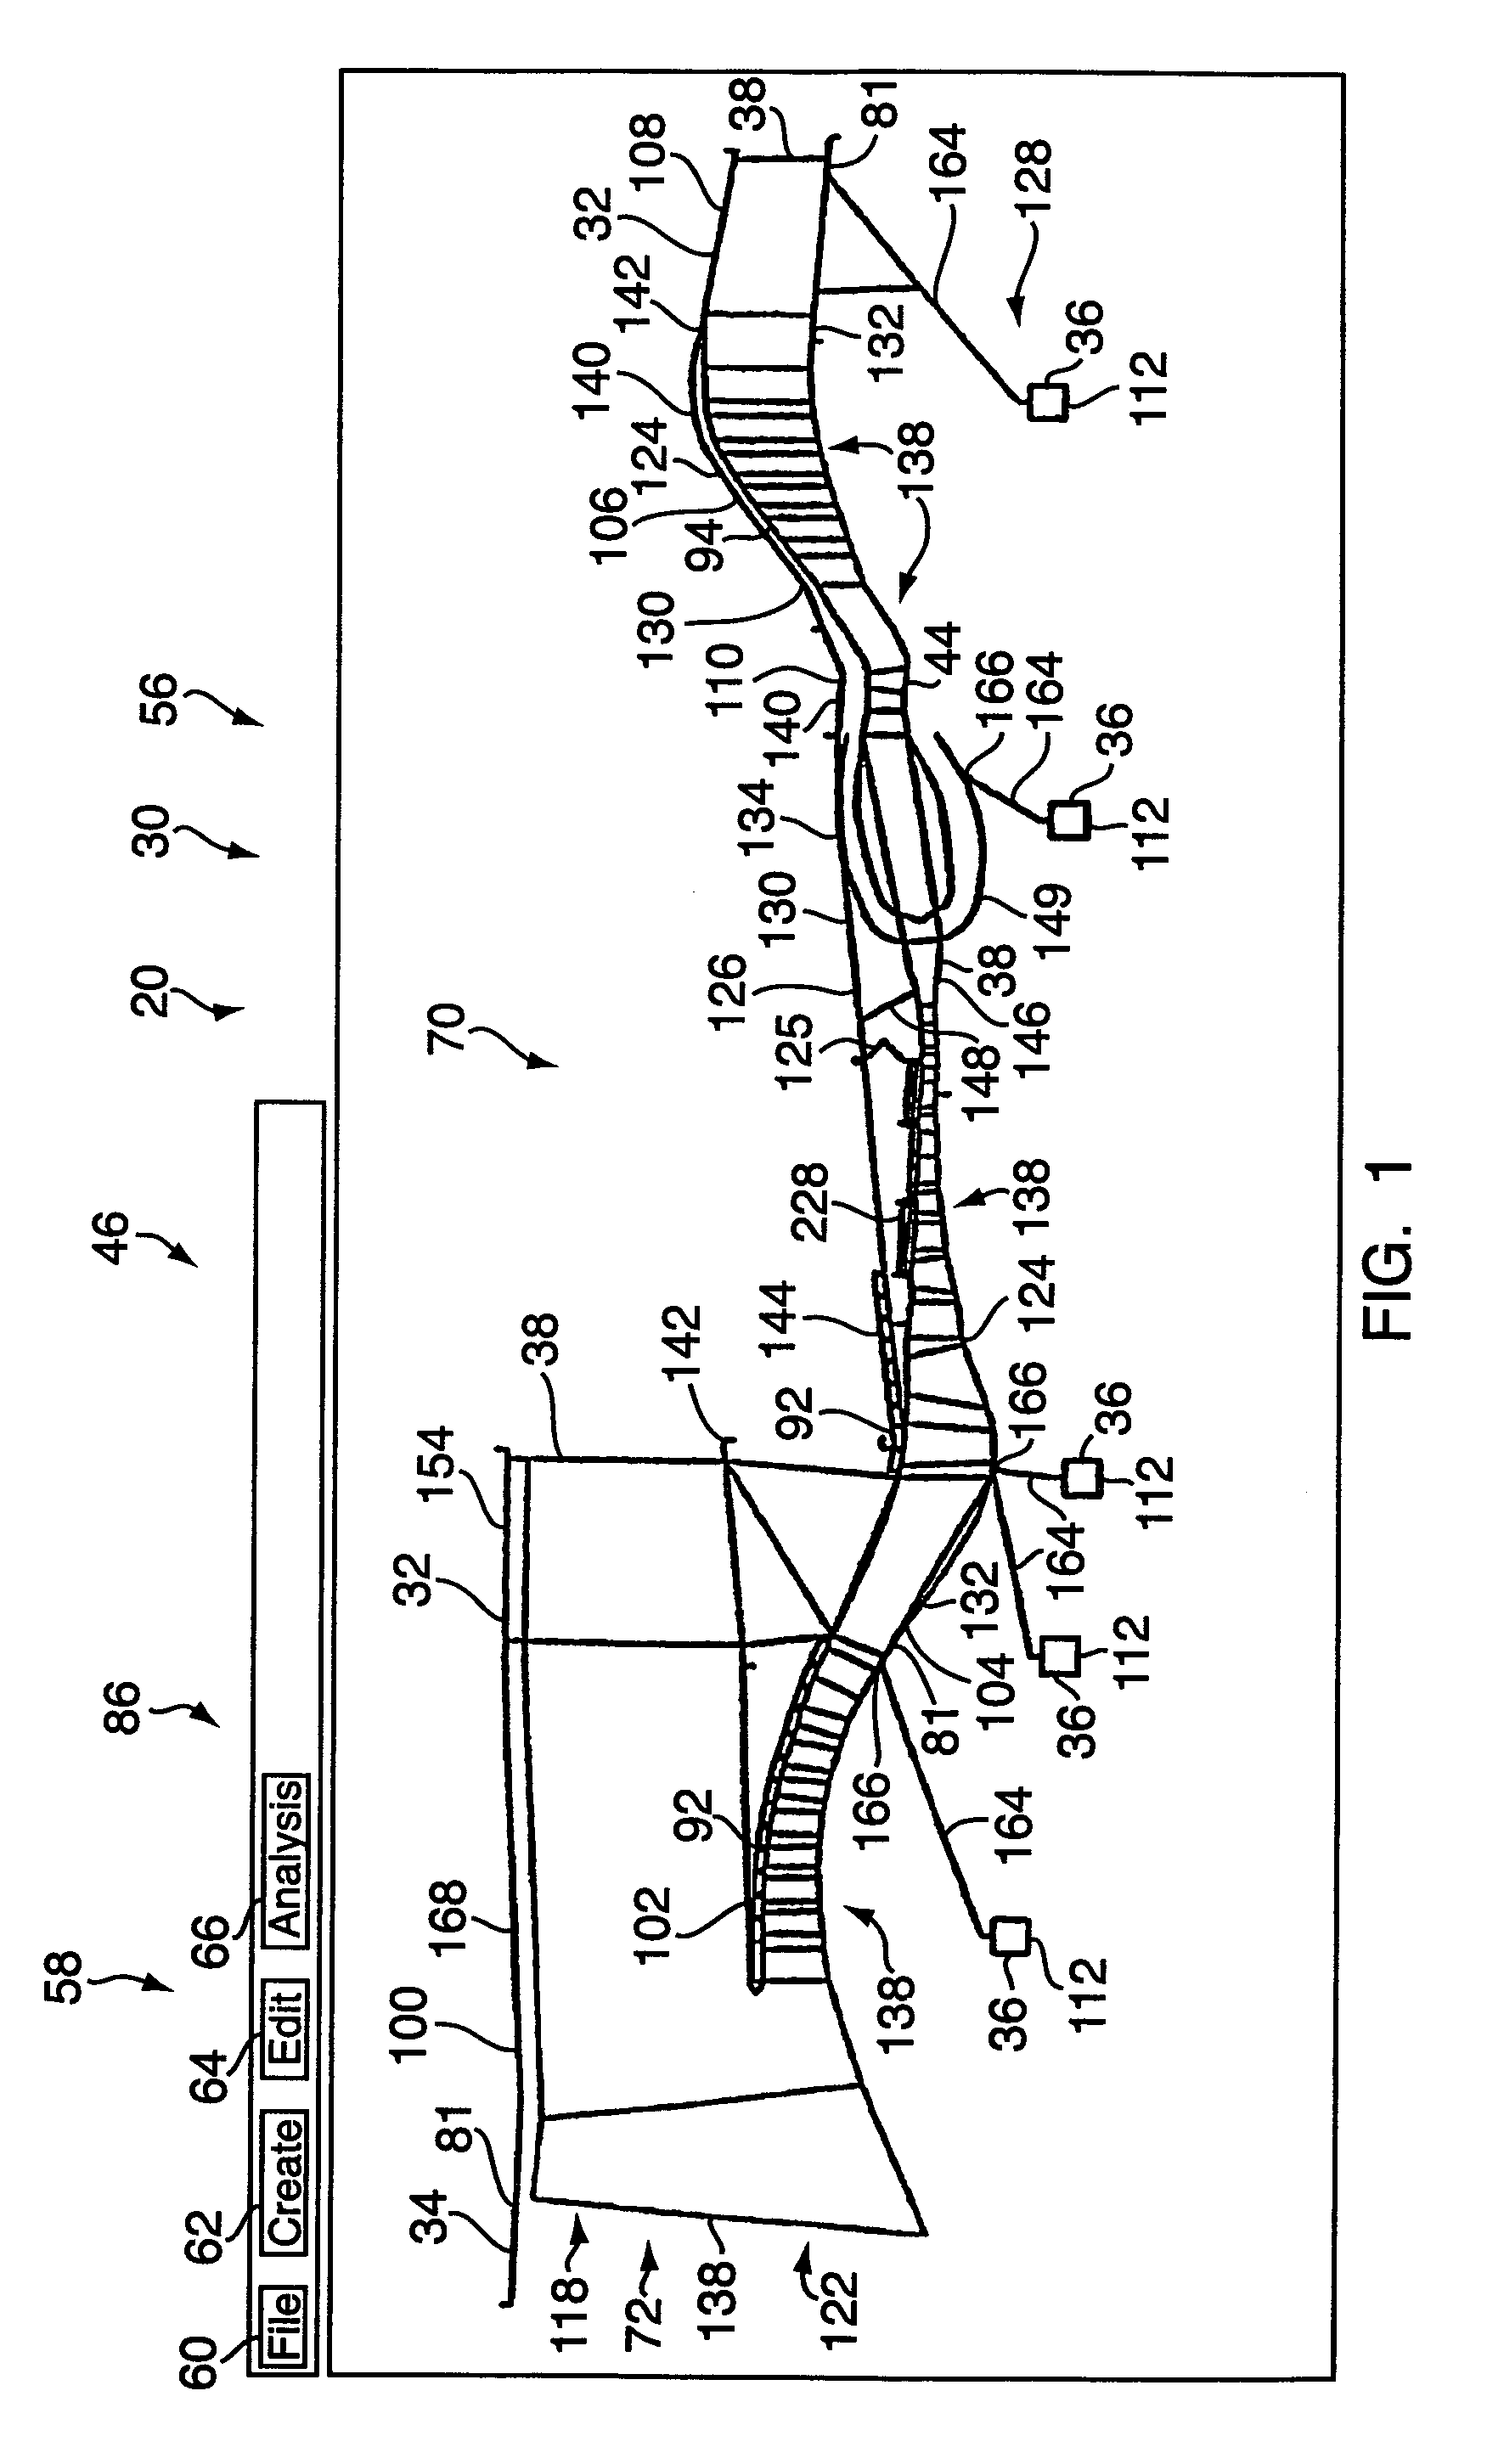 Method and system for designing frames and cases